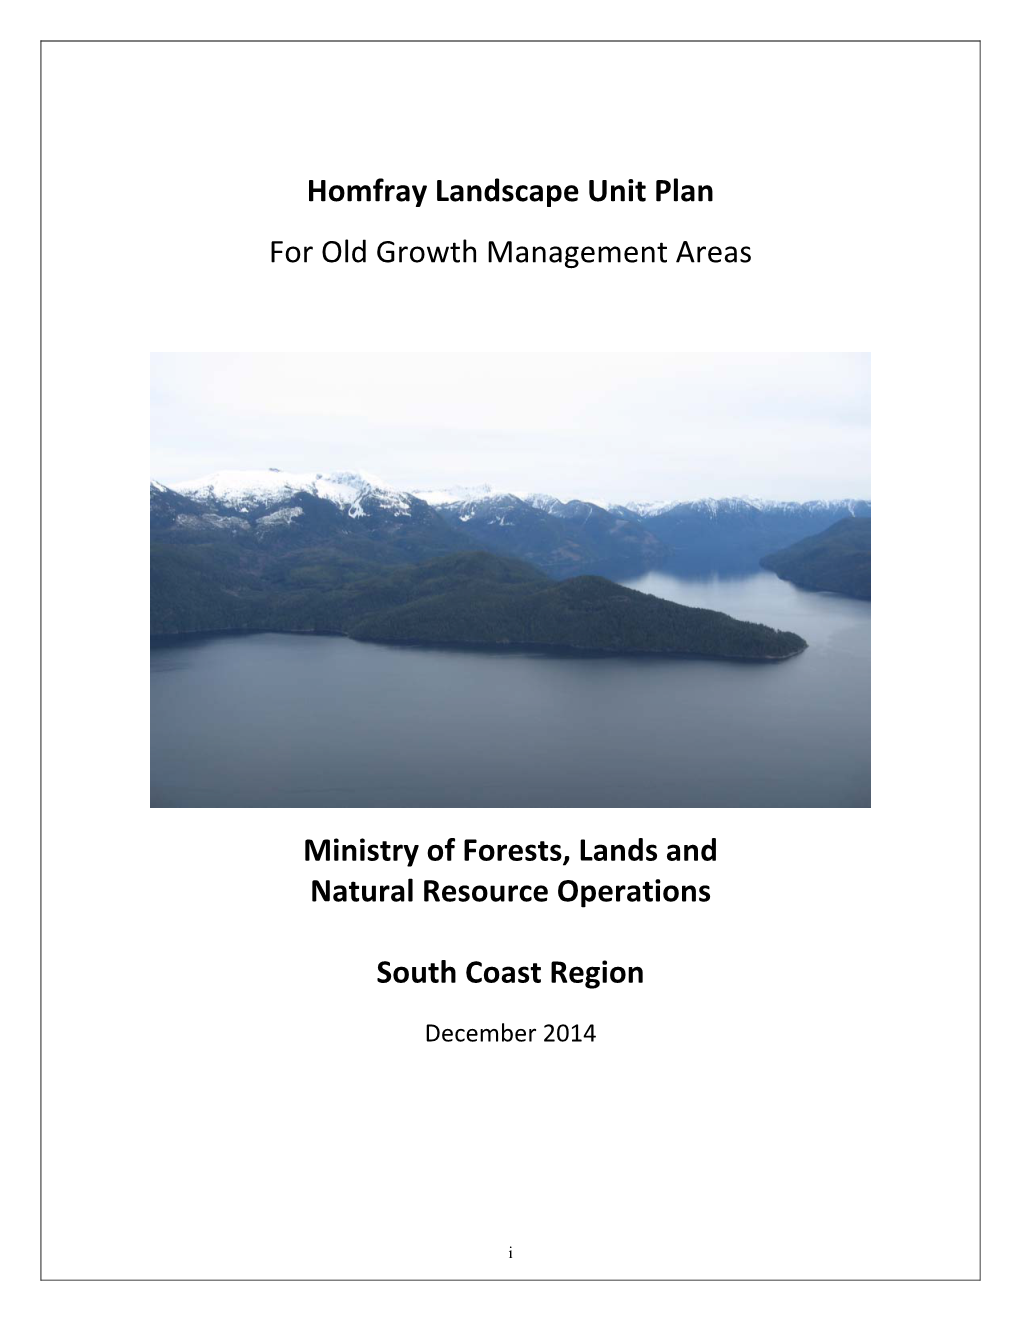 Homfray Landscape Unit Plan for Old Growth Management Areas